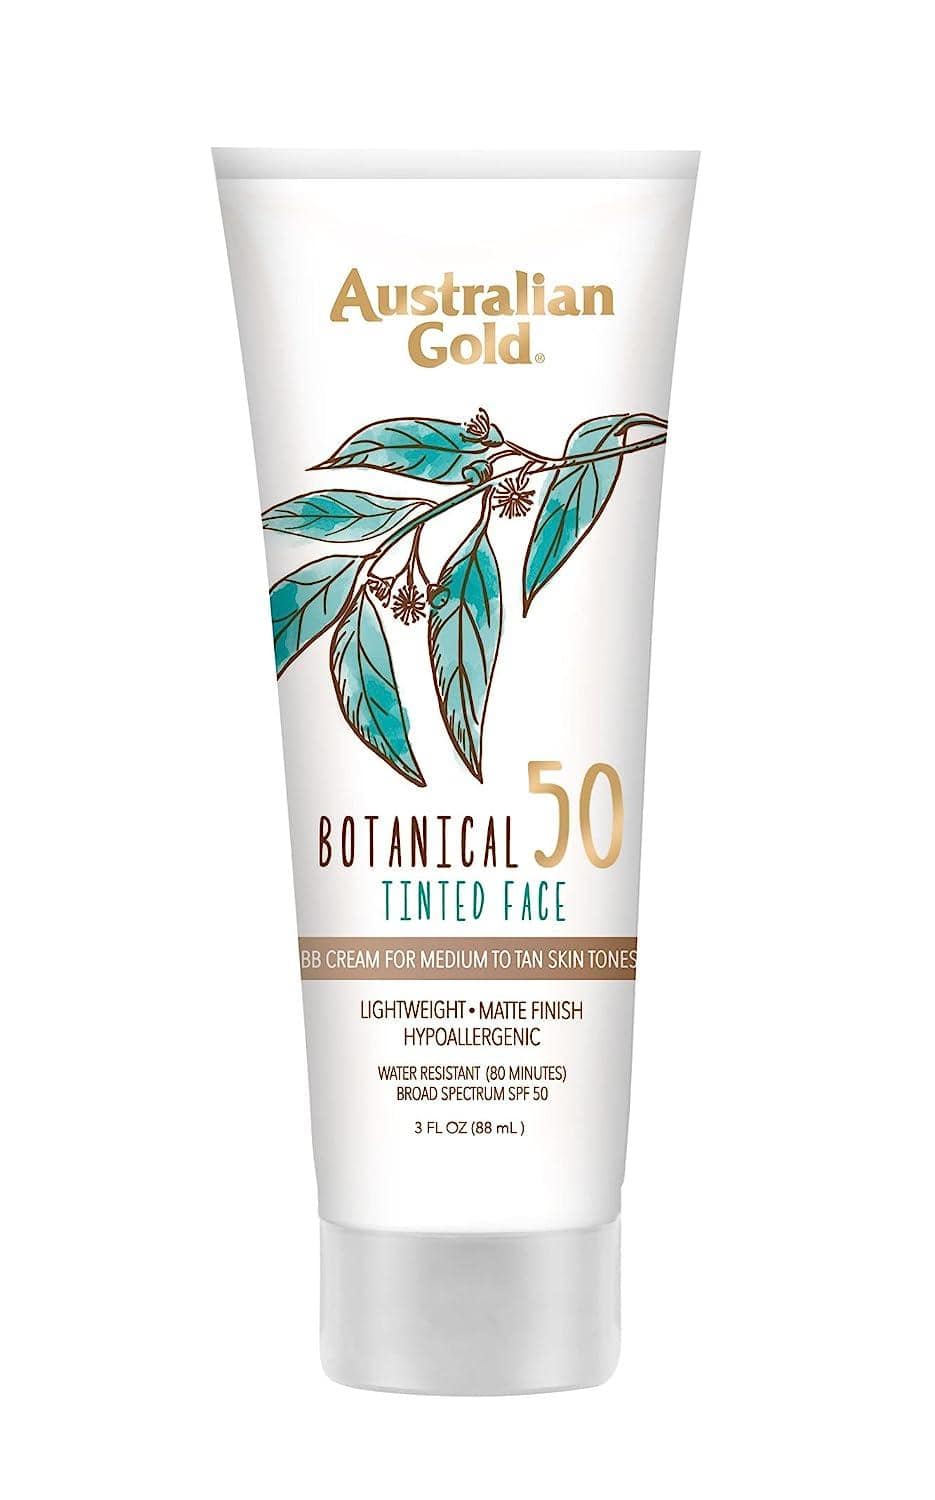 Australian Gold Botanical Sunscreen is my go-to: tinted, SPF 50, and a skin-tone-evening BB cream. Ideal for oily skin, mineral-based, and fragrance-free. Sunscreen for oily skin.